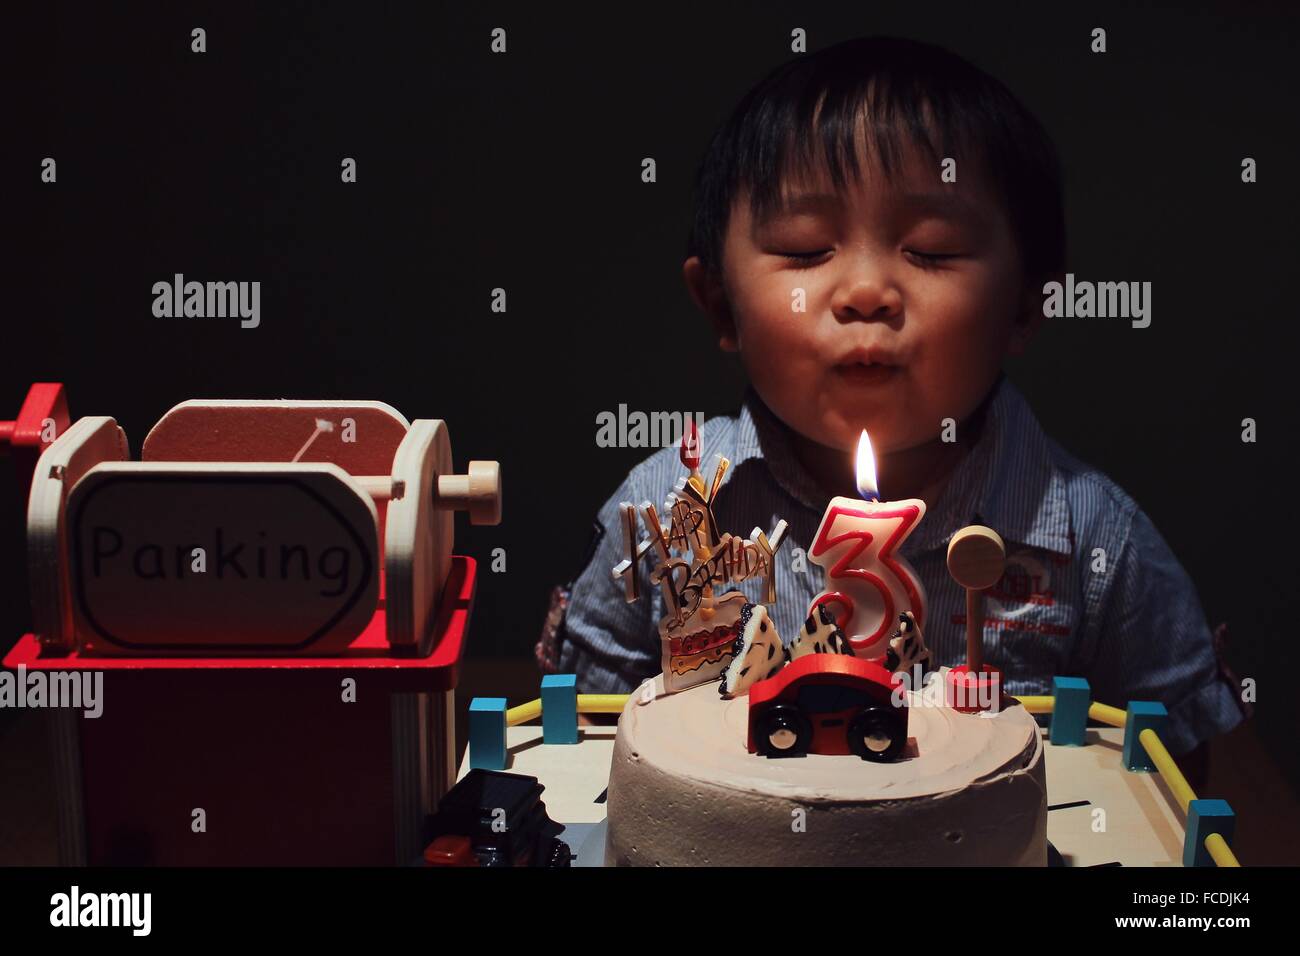 Cute Boy With Eye Closed Blowing Birthday Candle On Cake In Darkroom Stock Photo